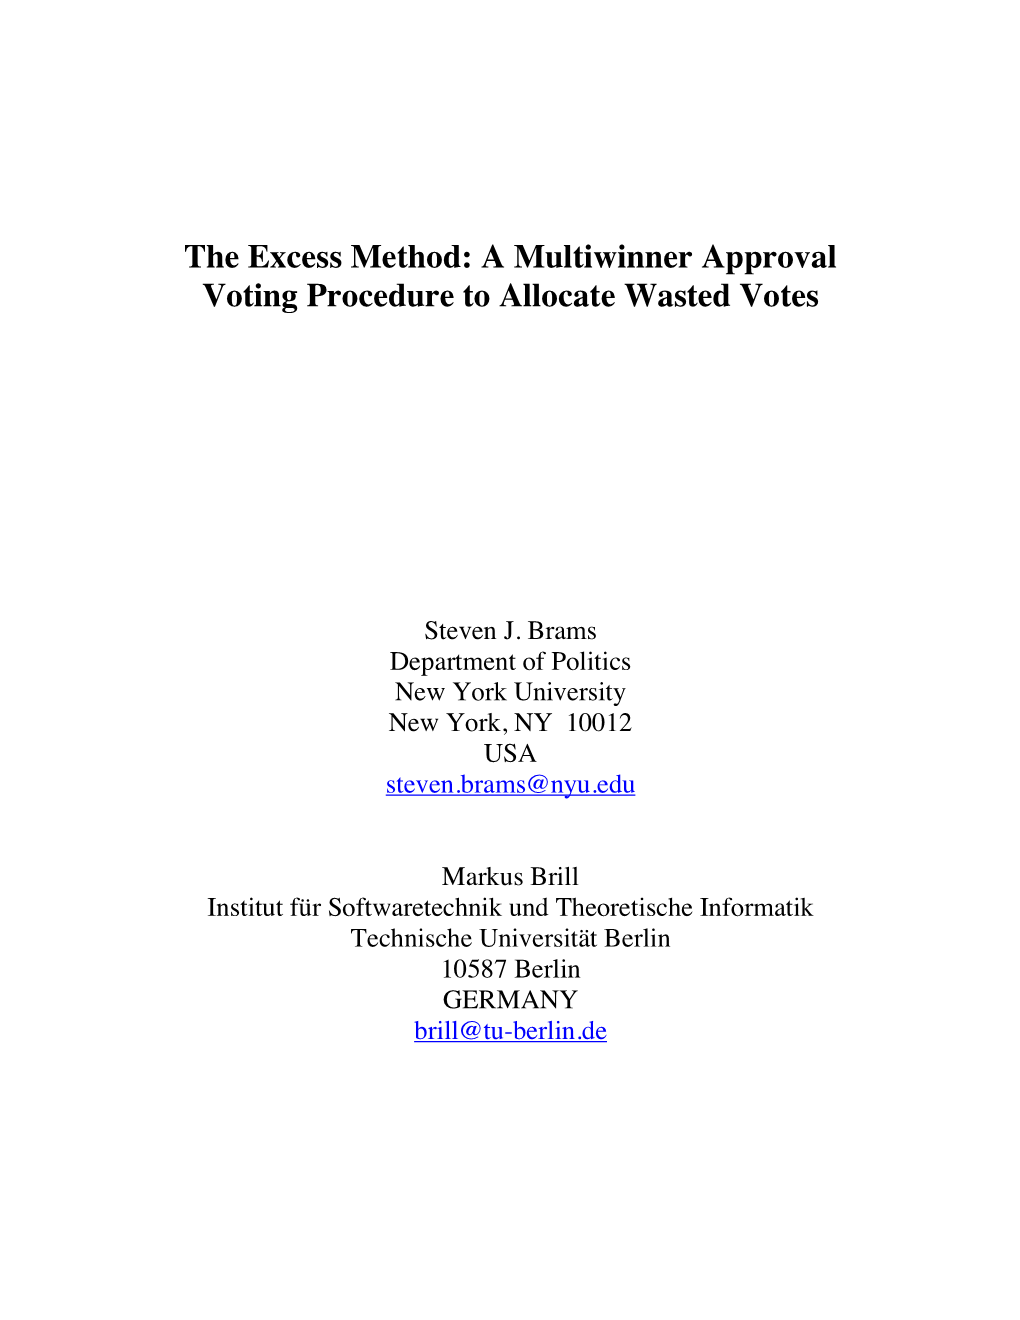 The Excess Method: a Multiwinner Approval Voting Procedure to Allocate Wasted Votes